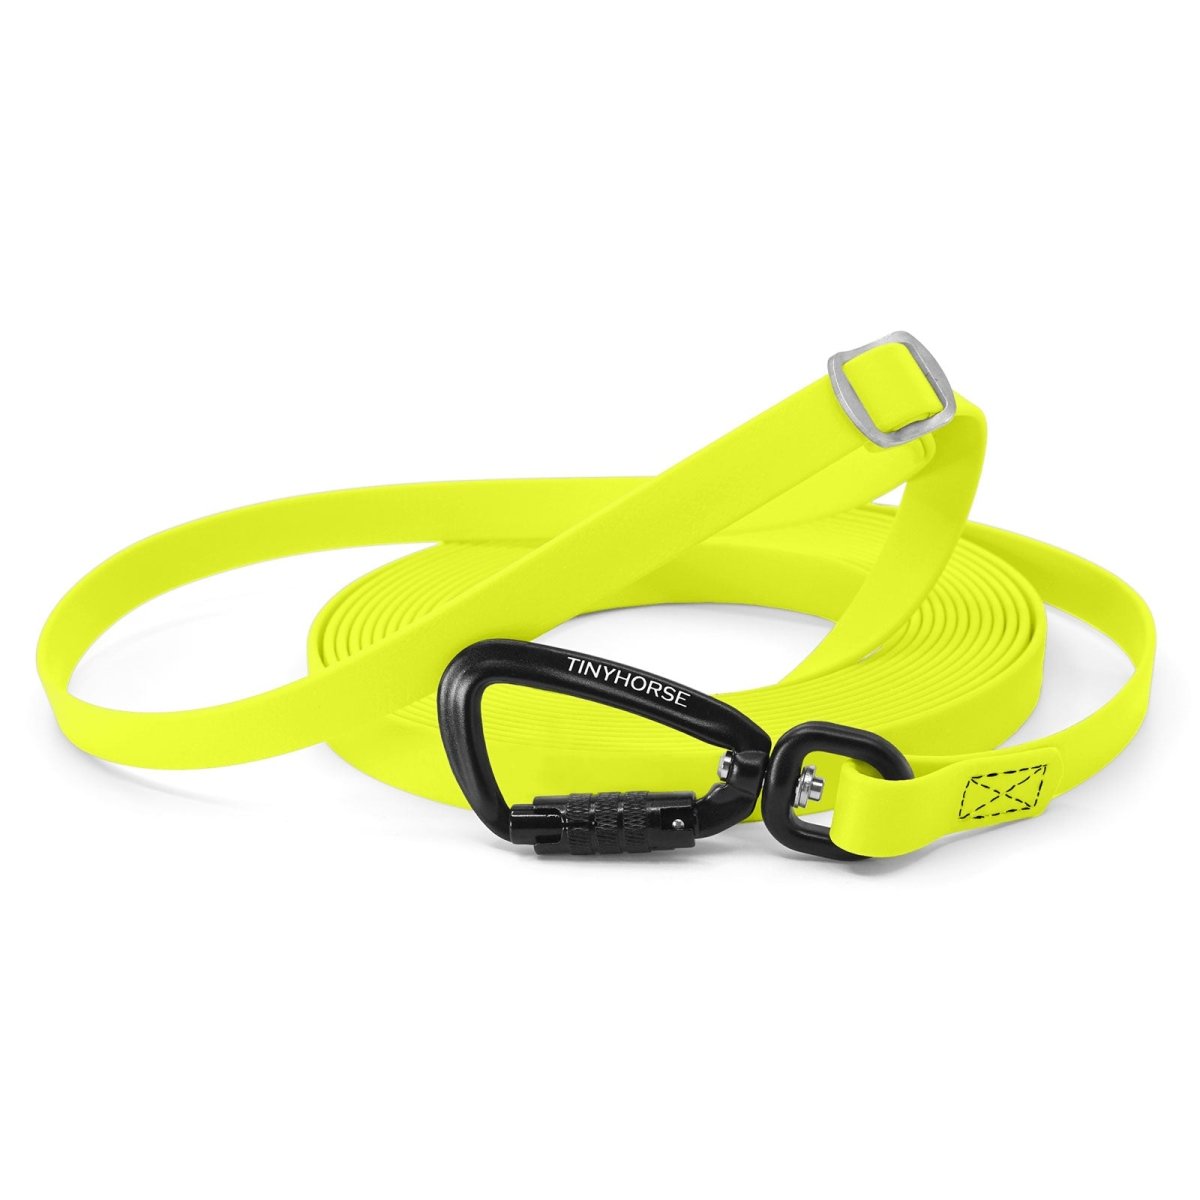 An adjustable neon yellow-coloured Trainer made of BioThane and an auto-locking carabiner